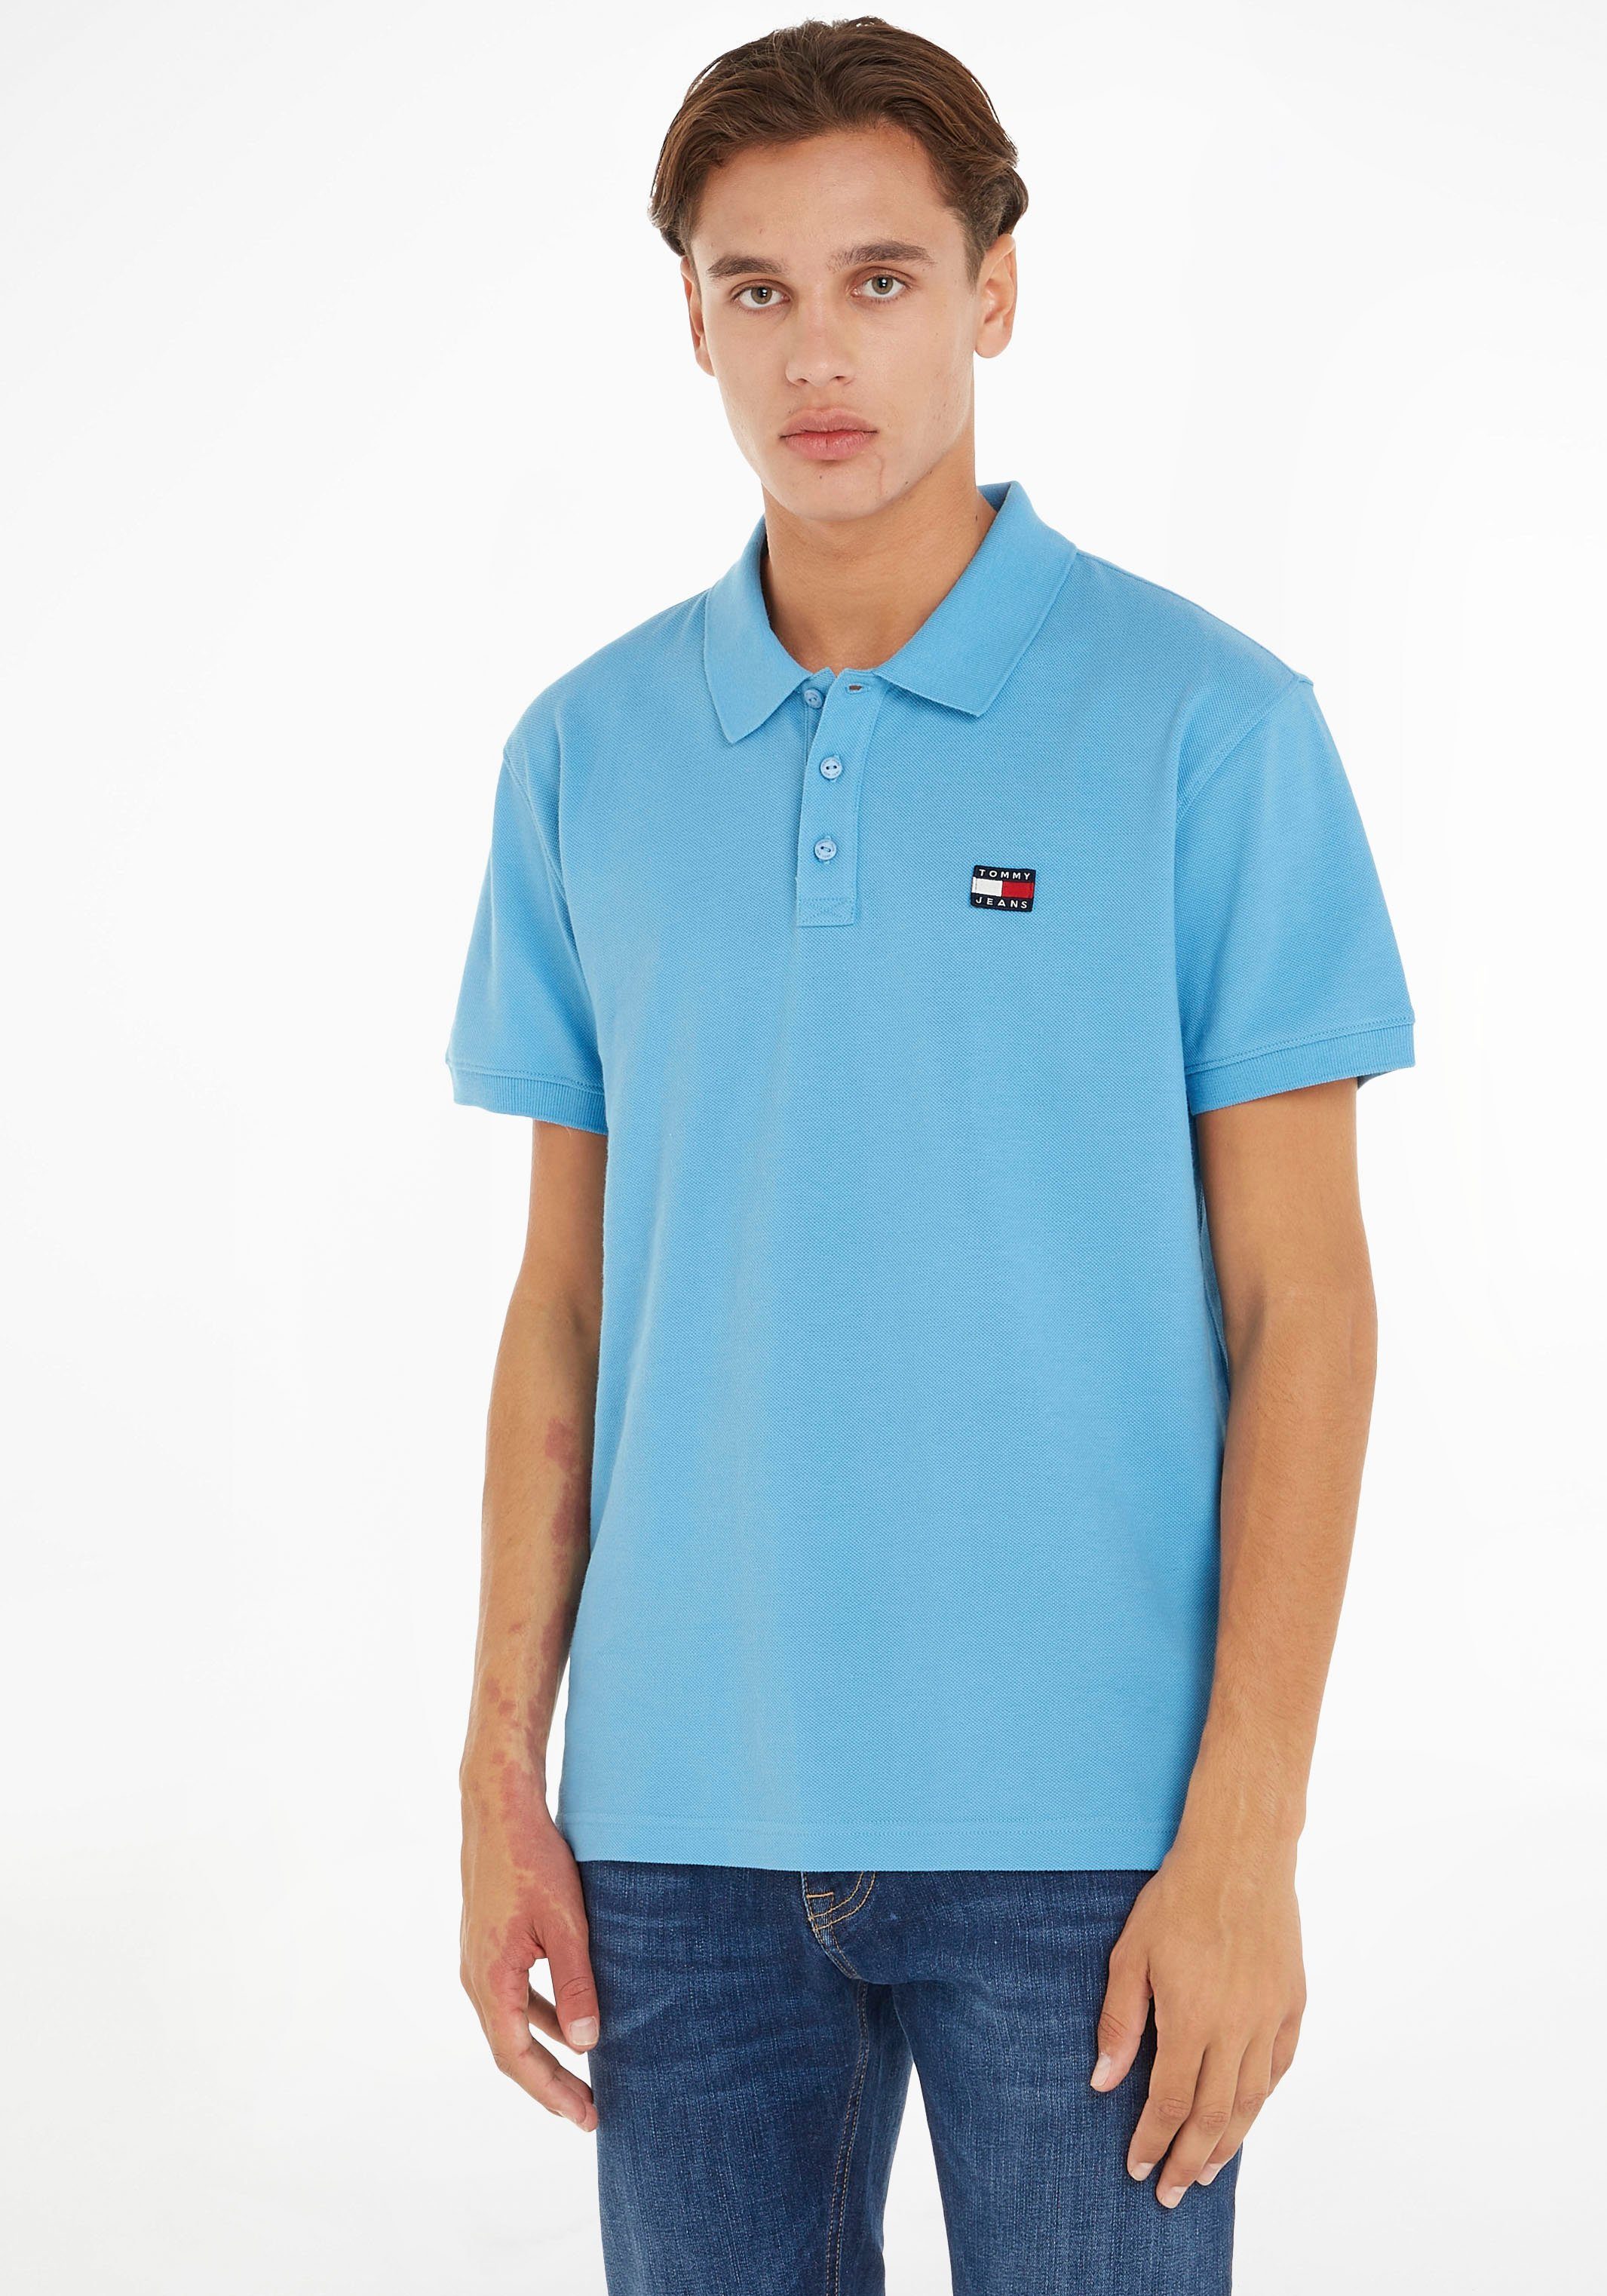 Skysail XS Poloshirt 3-Knopf-Form CLSC BADGE mit Tommy Jeans TJM POLO